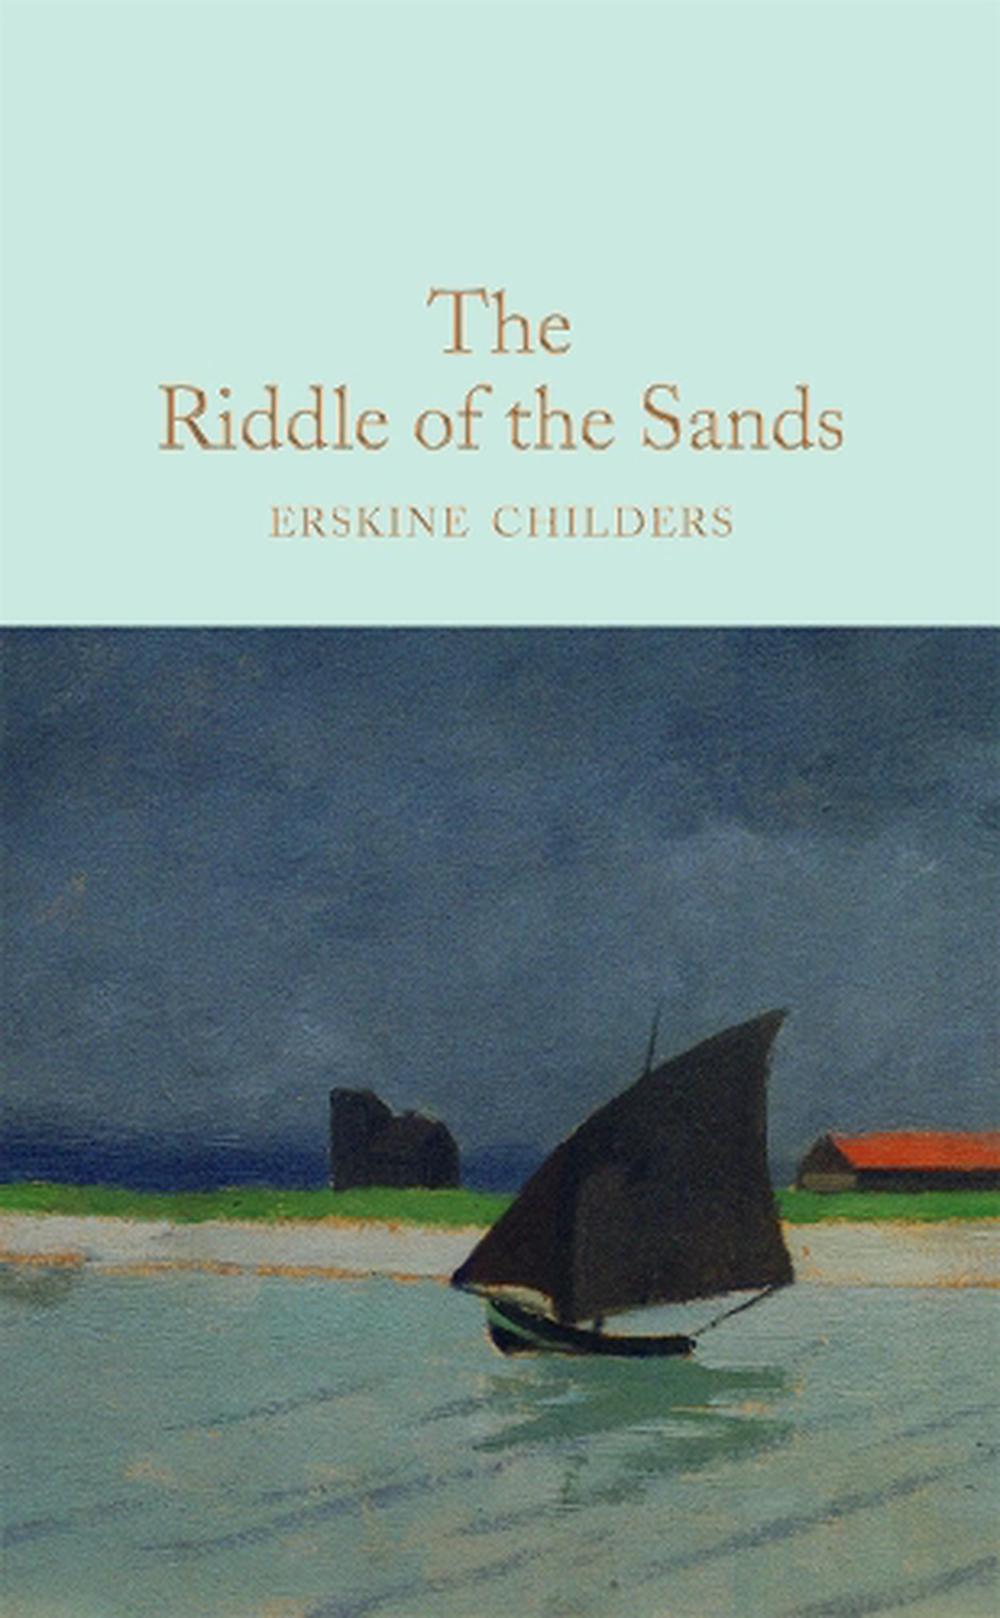 riddle of the sands author